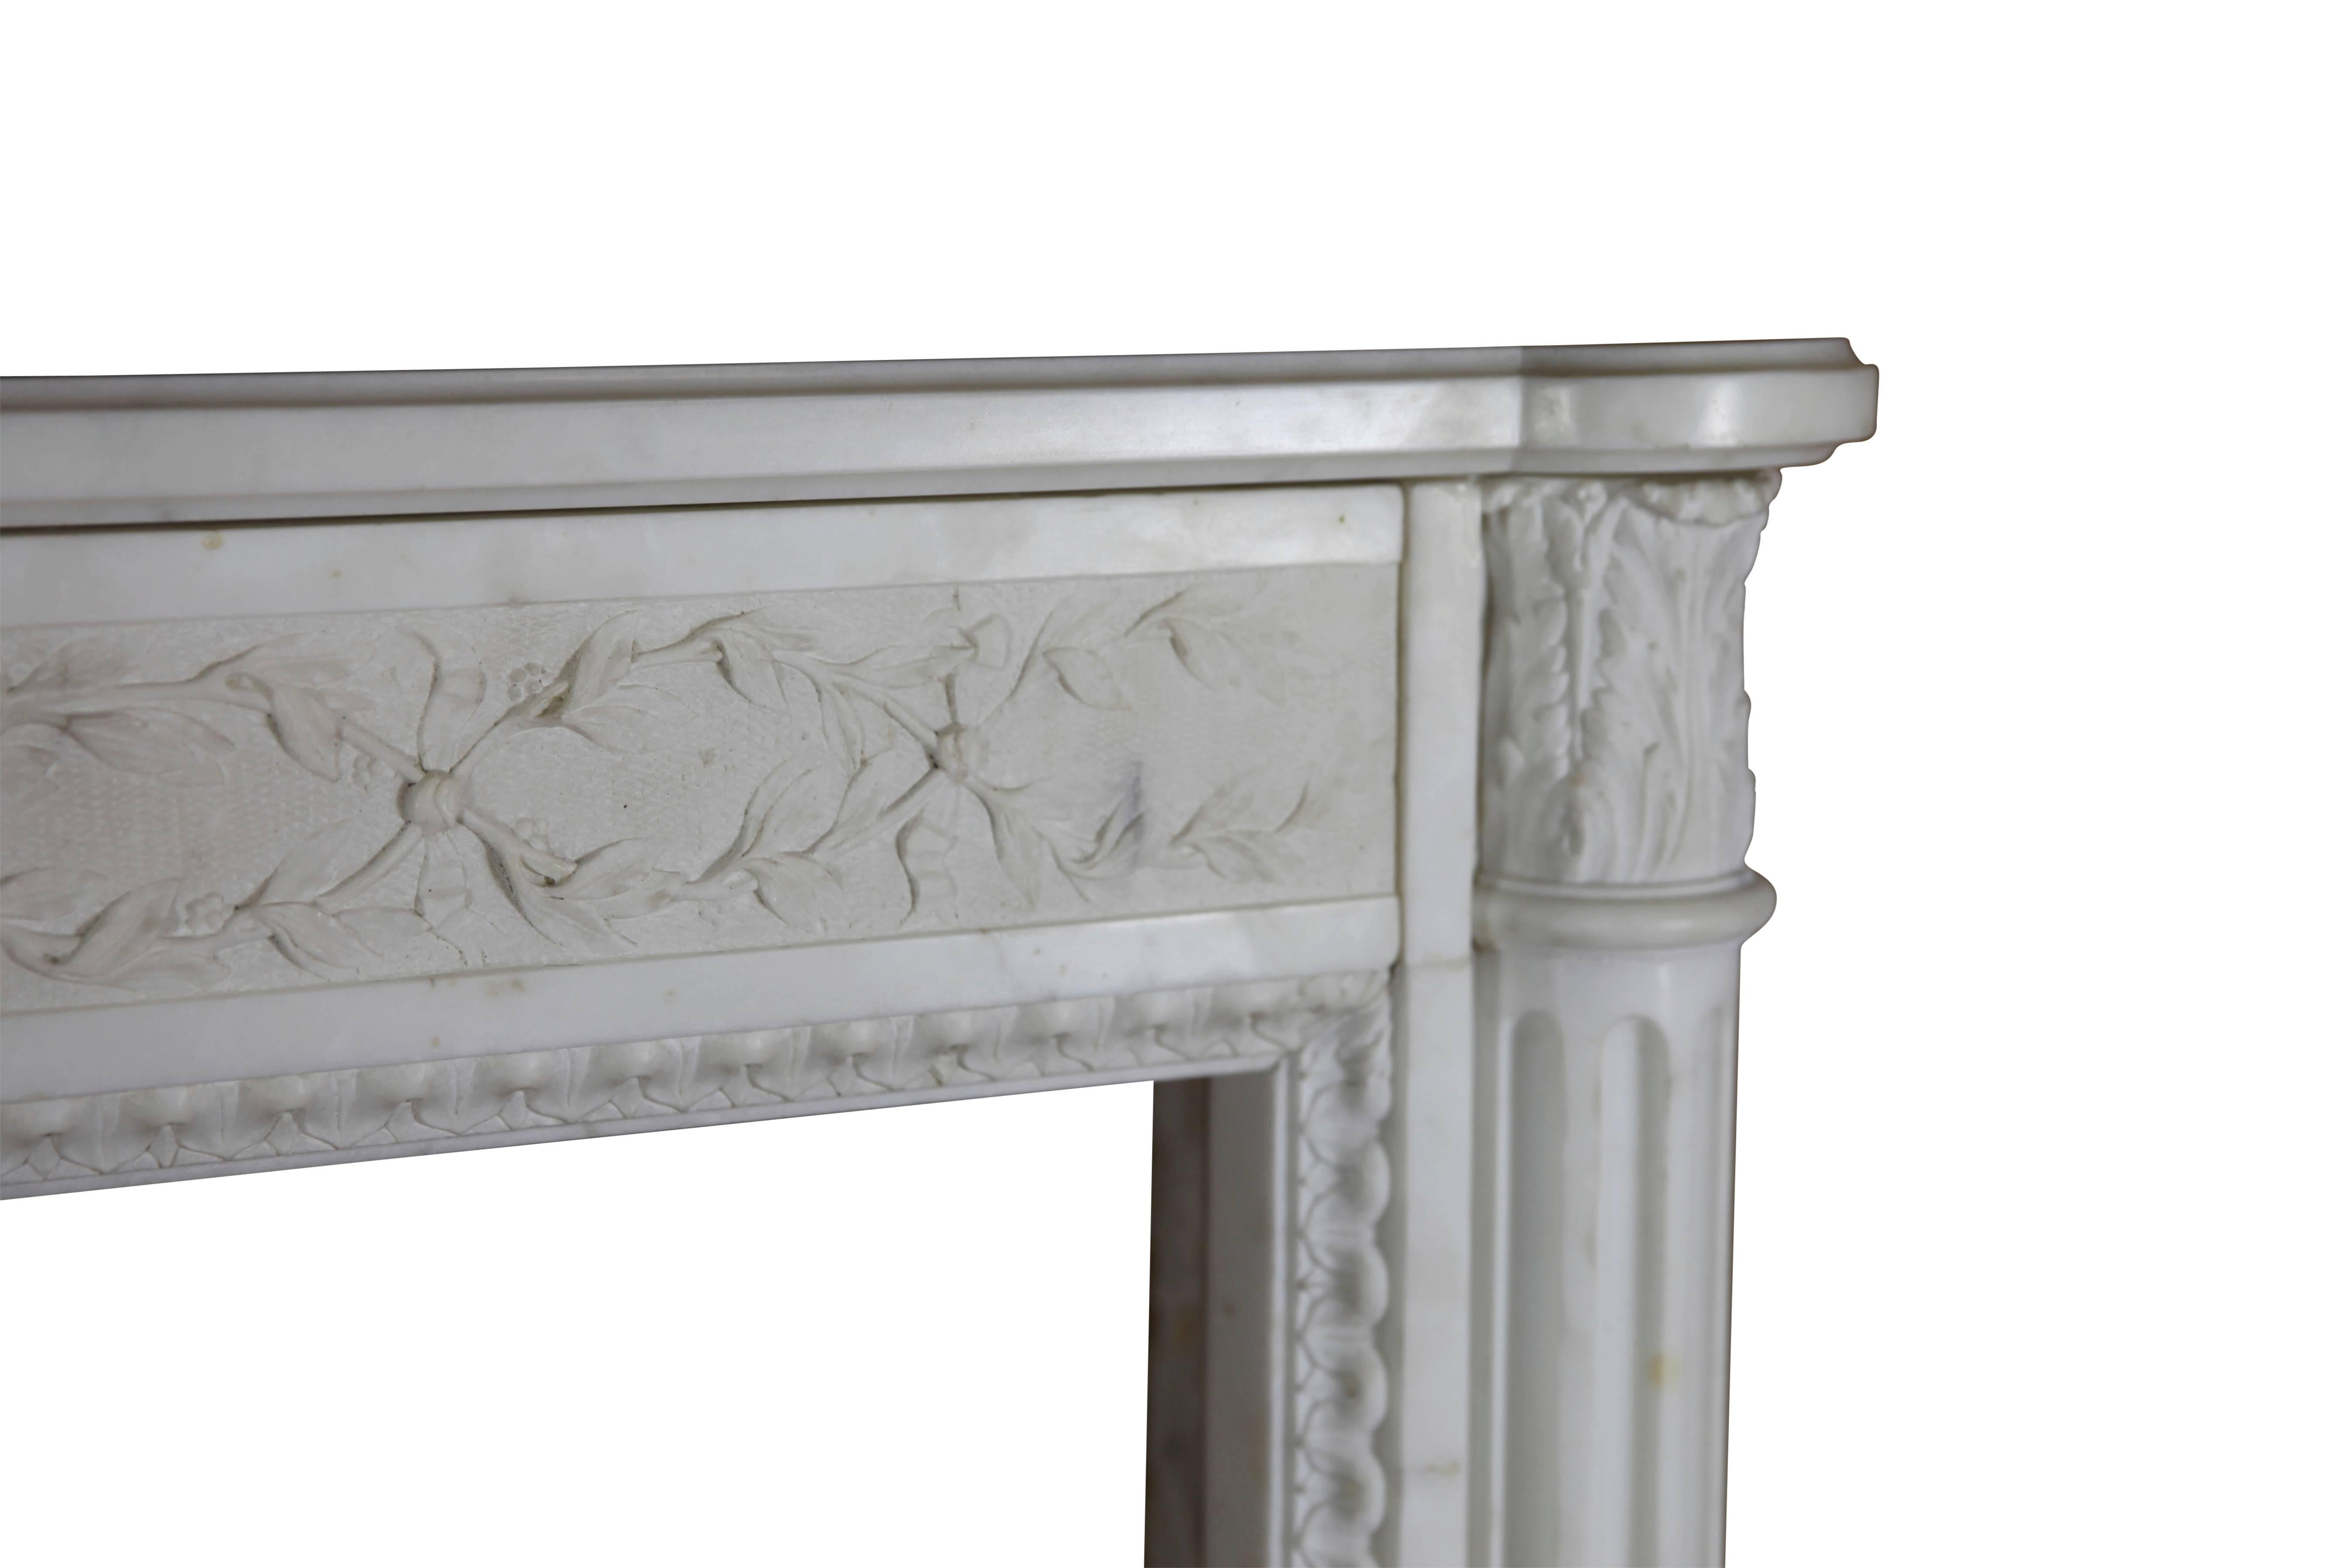 This small vintage fireplace surround in white statuary marble is a very unique piece. This mantel would perfectly fit in American colonial style interior as well as in a modern or even a contemporary interior design. A high-end chimney piece for a